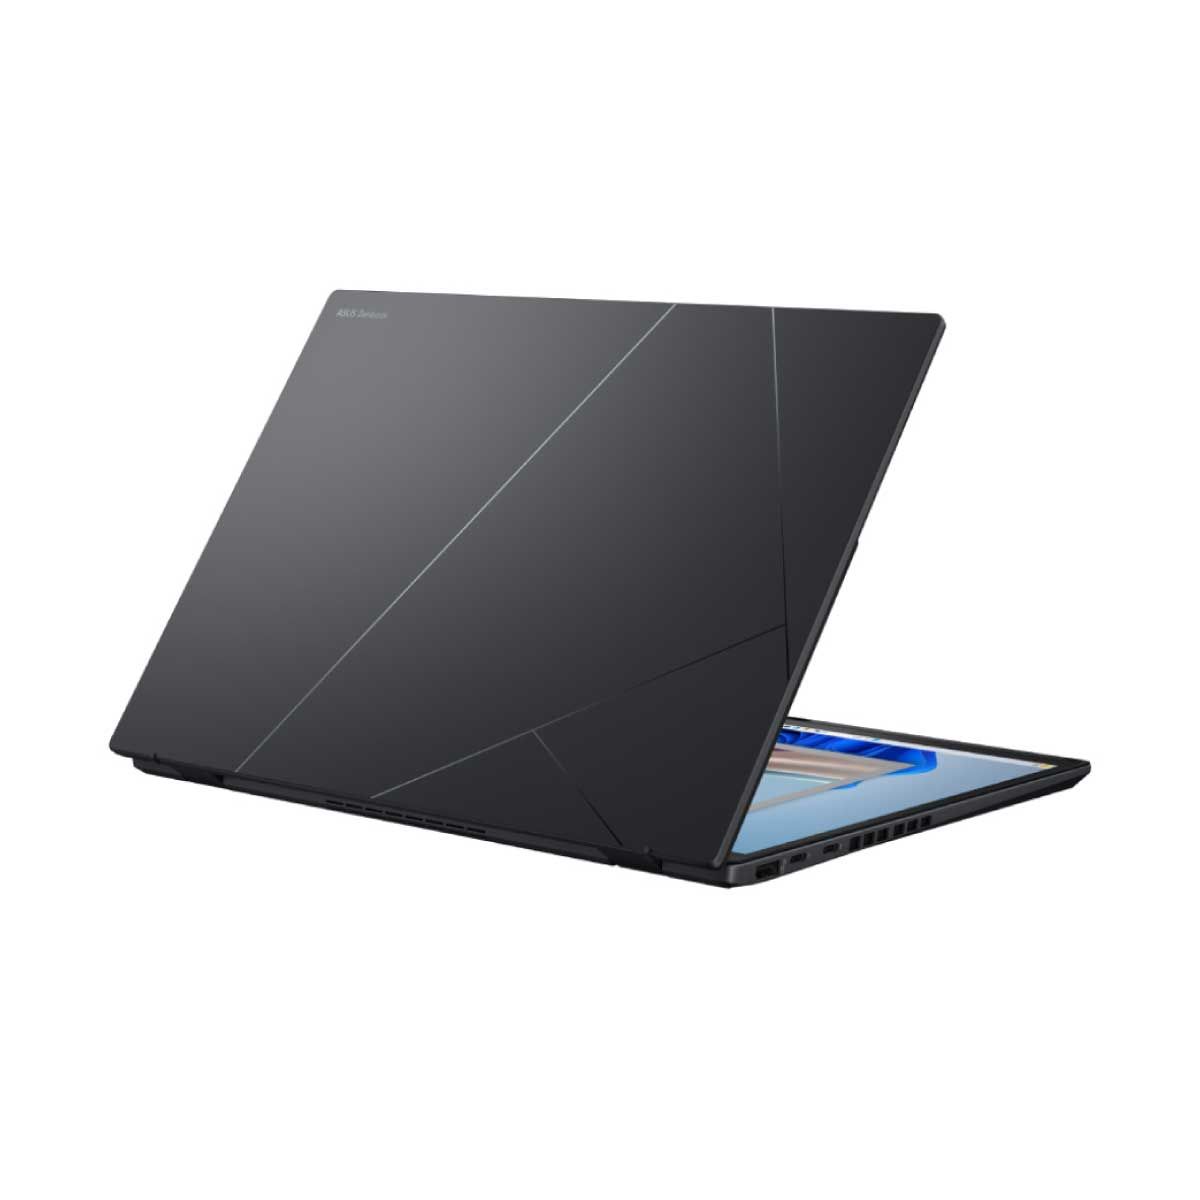 NOTEBOOK (โน้ตบุ๊ค) ASUS ZENBOOK DUO UX8406MA-QL736WS (INKWELL GRAY)